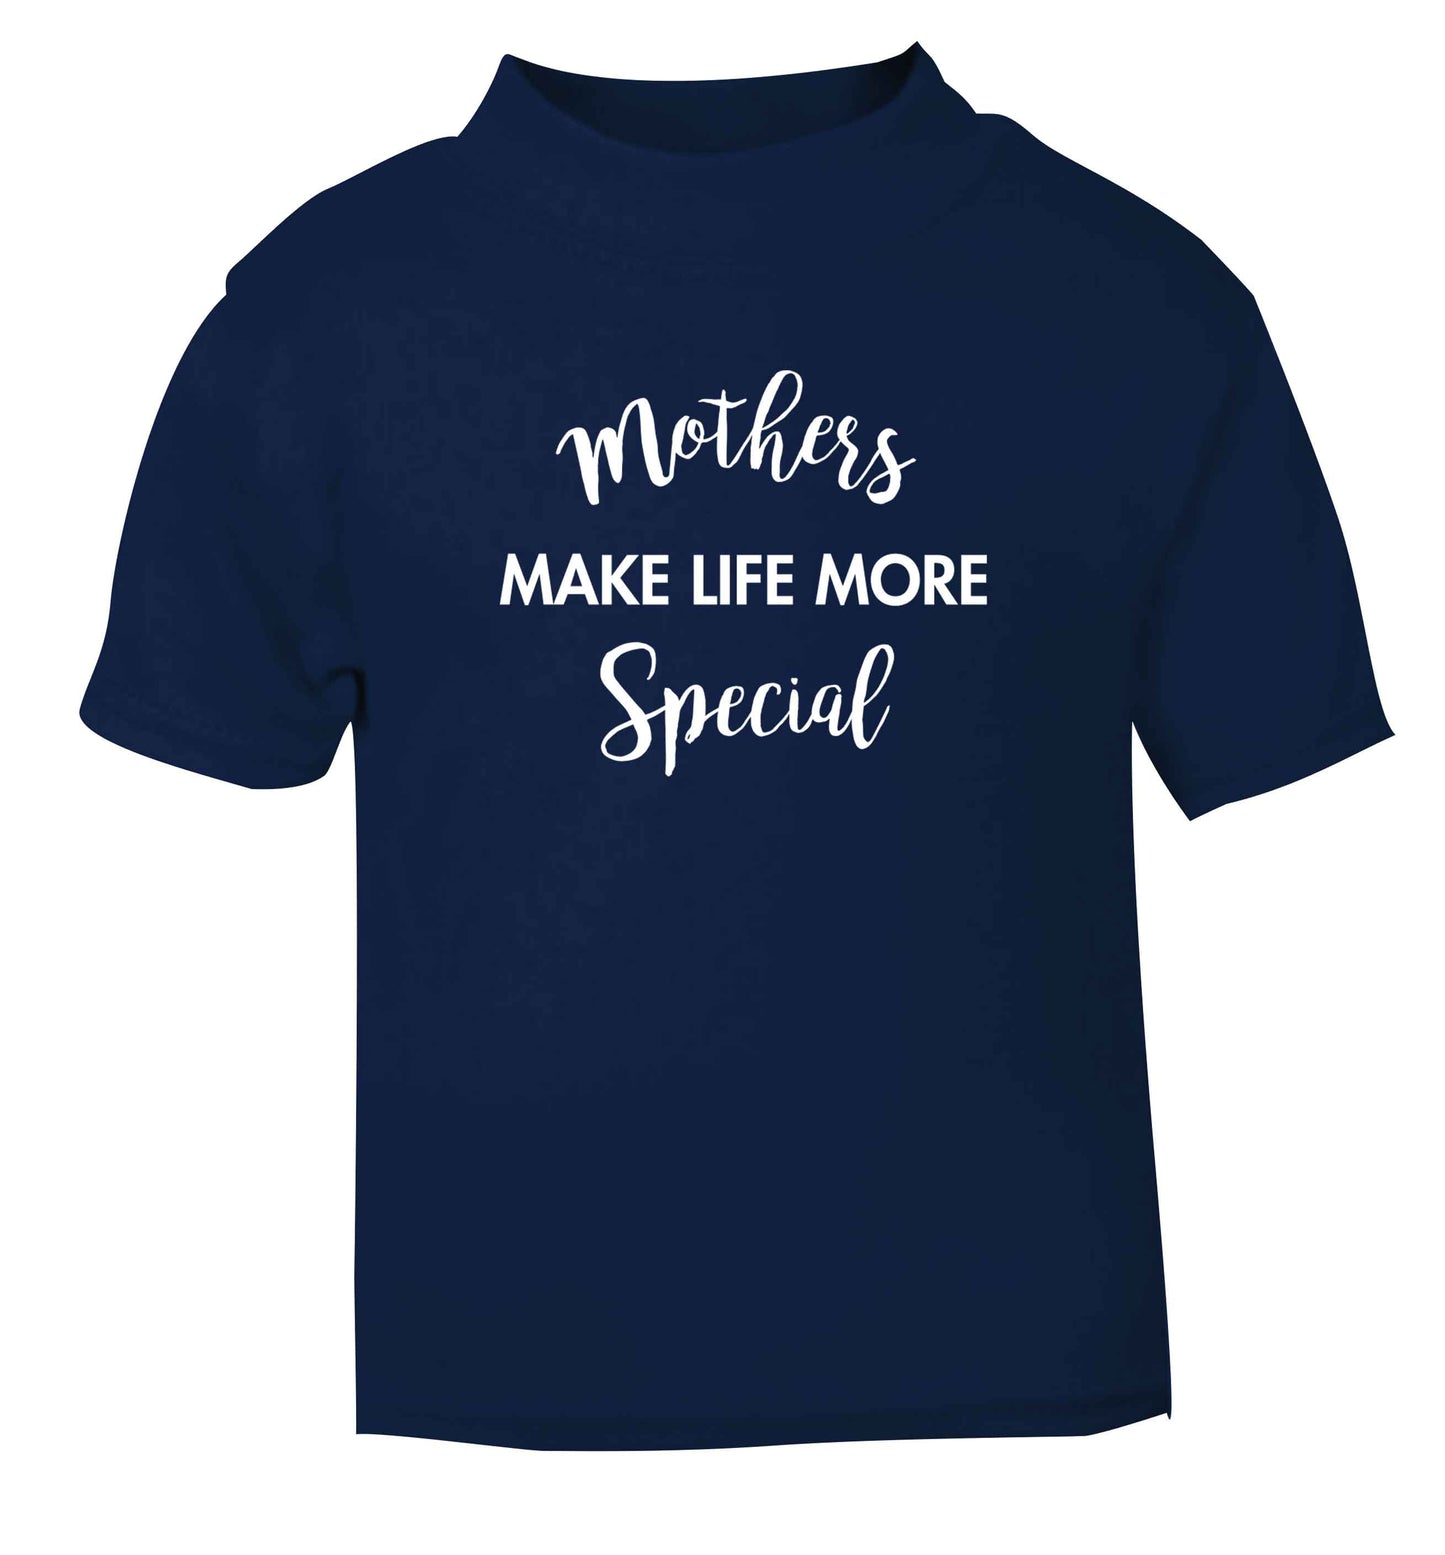 Mother's make life more special navy baby toddler Tshirt 2 Years